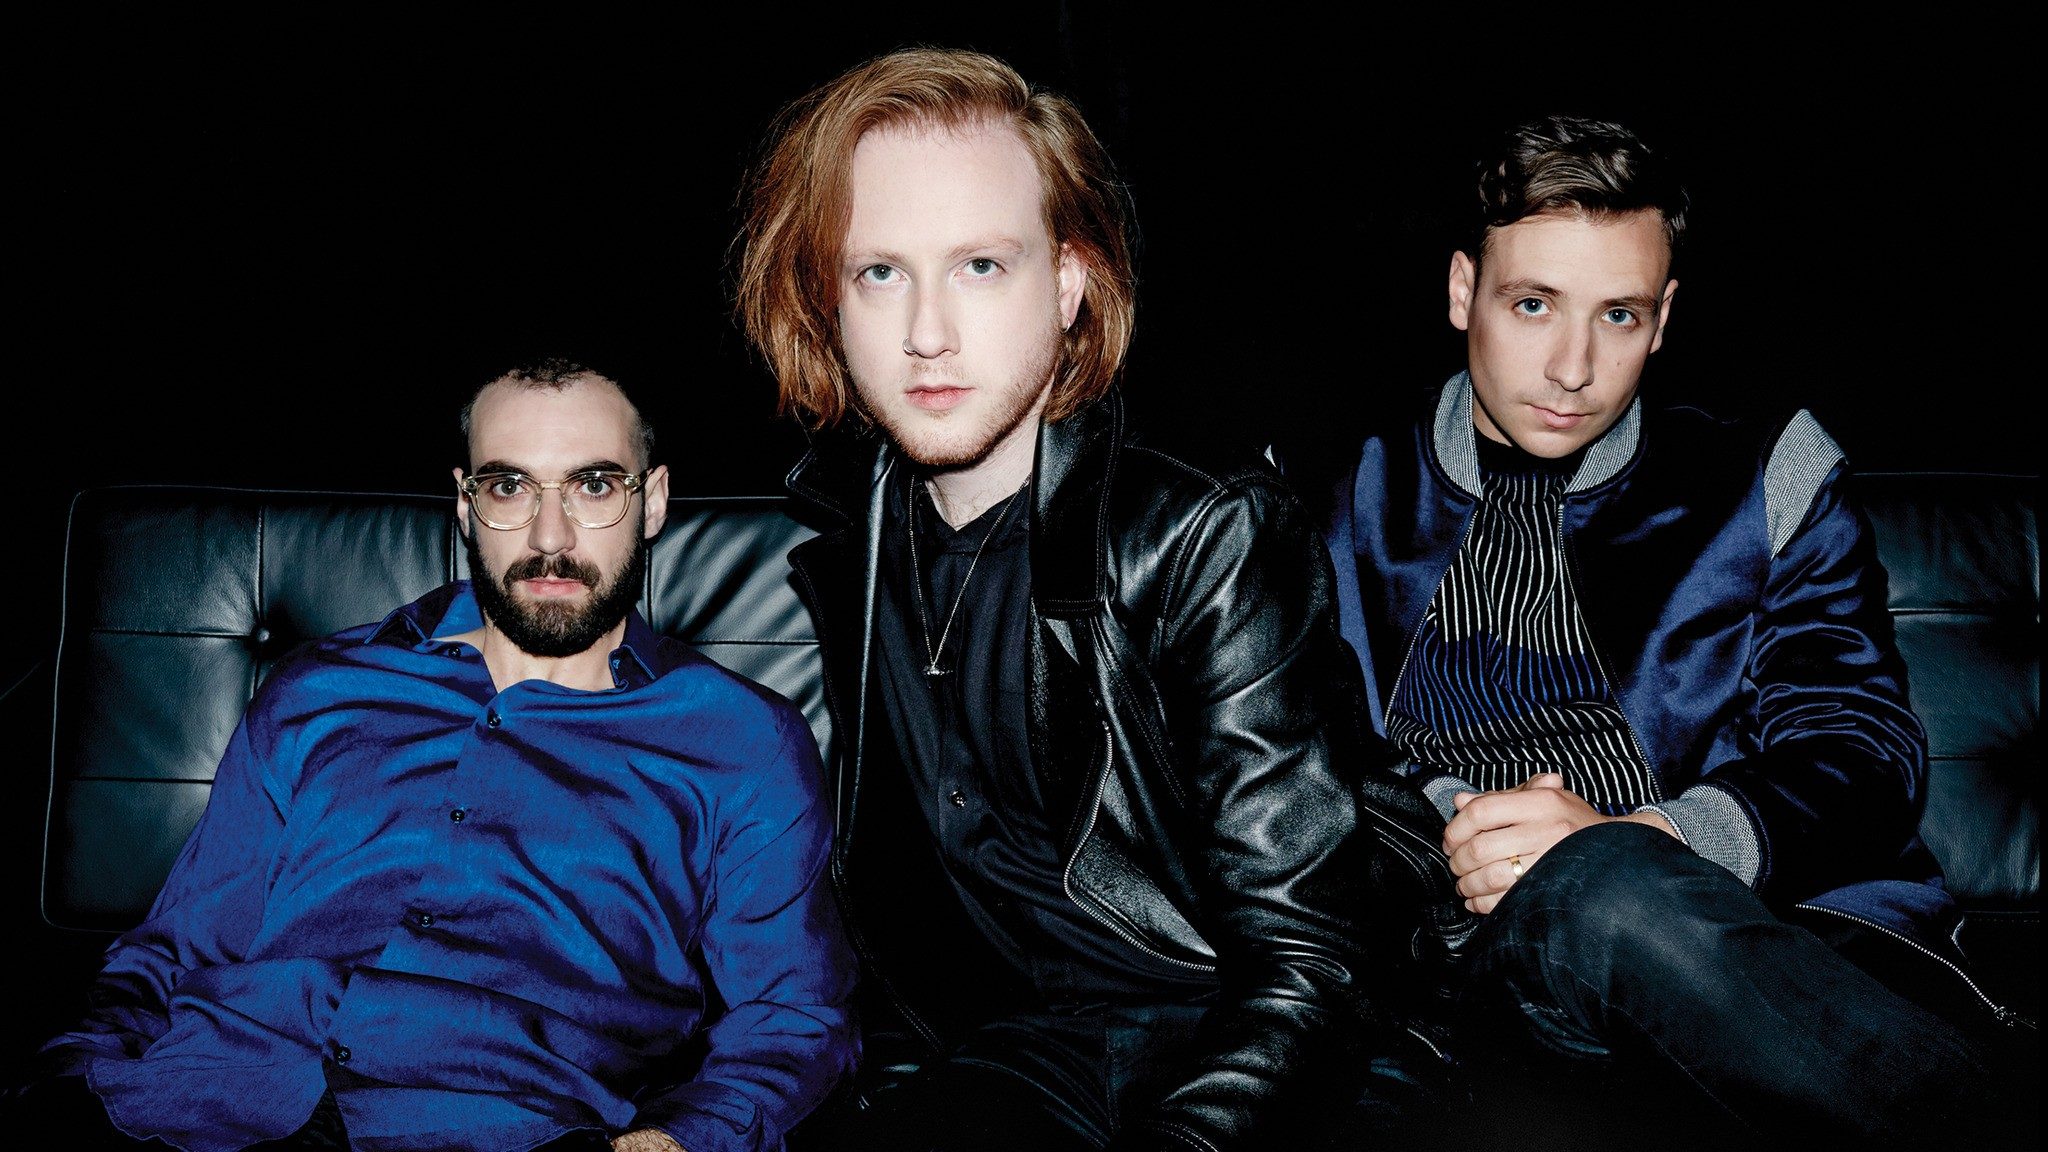 Two Door Cinema Club Announce New Album Keep On Smiling For September 2022  Release, Share Lead Single “Wonderful Life” - mxdwn Music